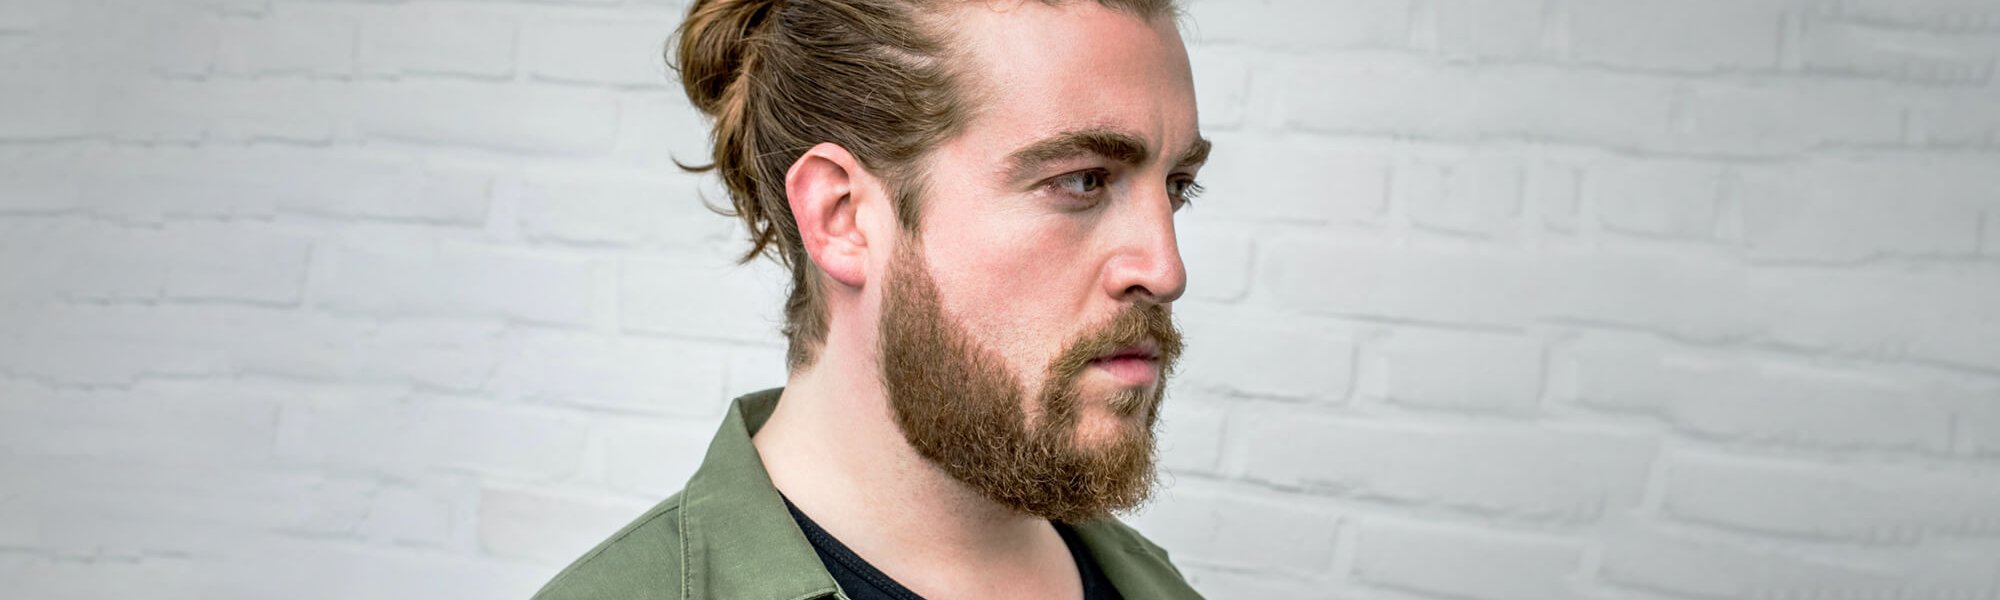 An Expert Guide To Growing Your Hair Out